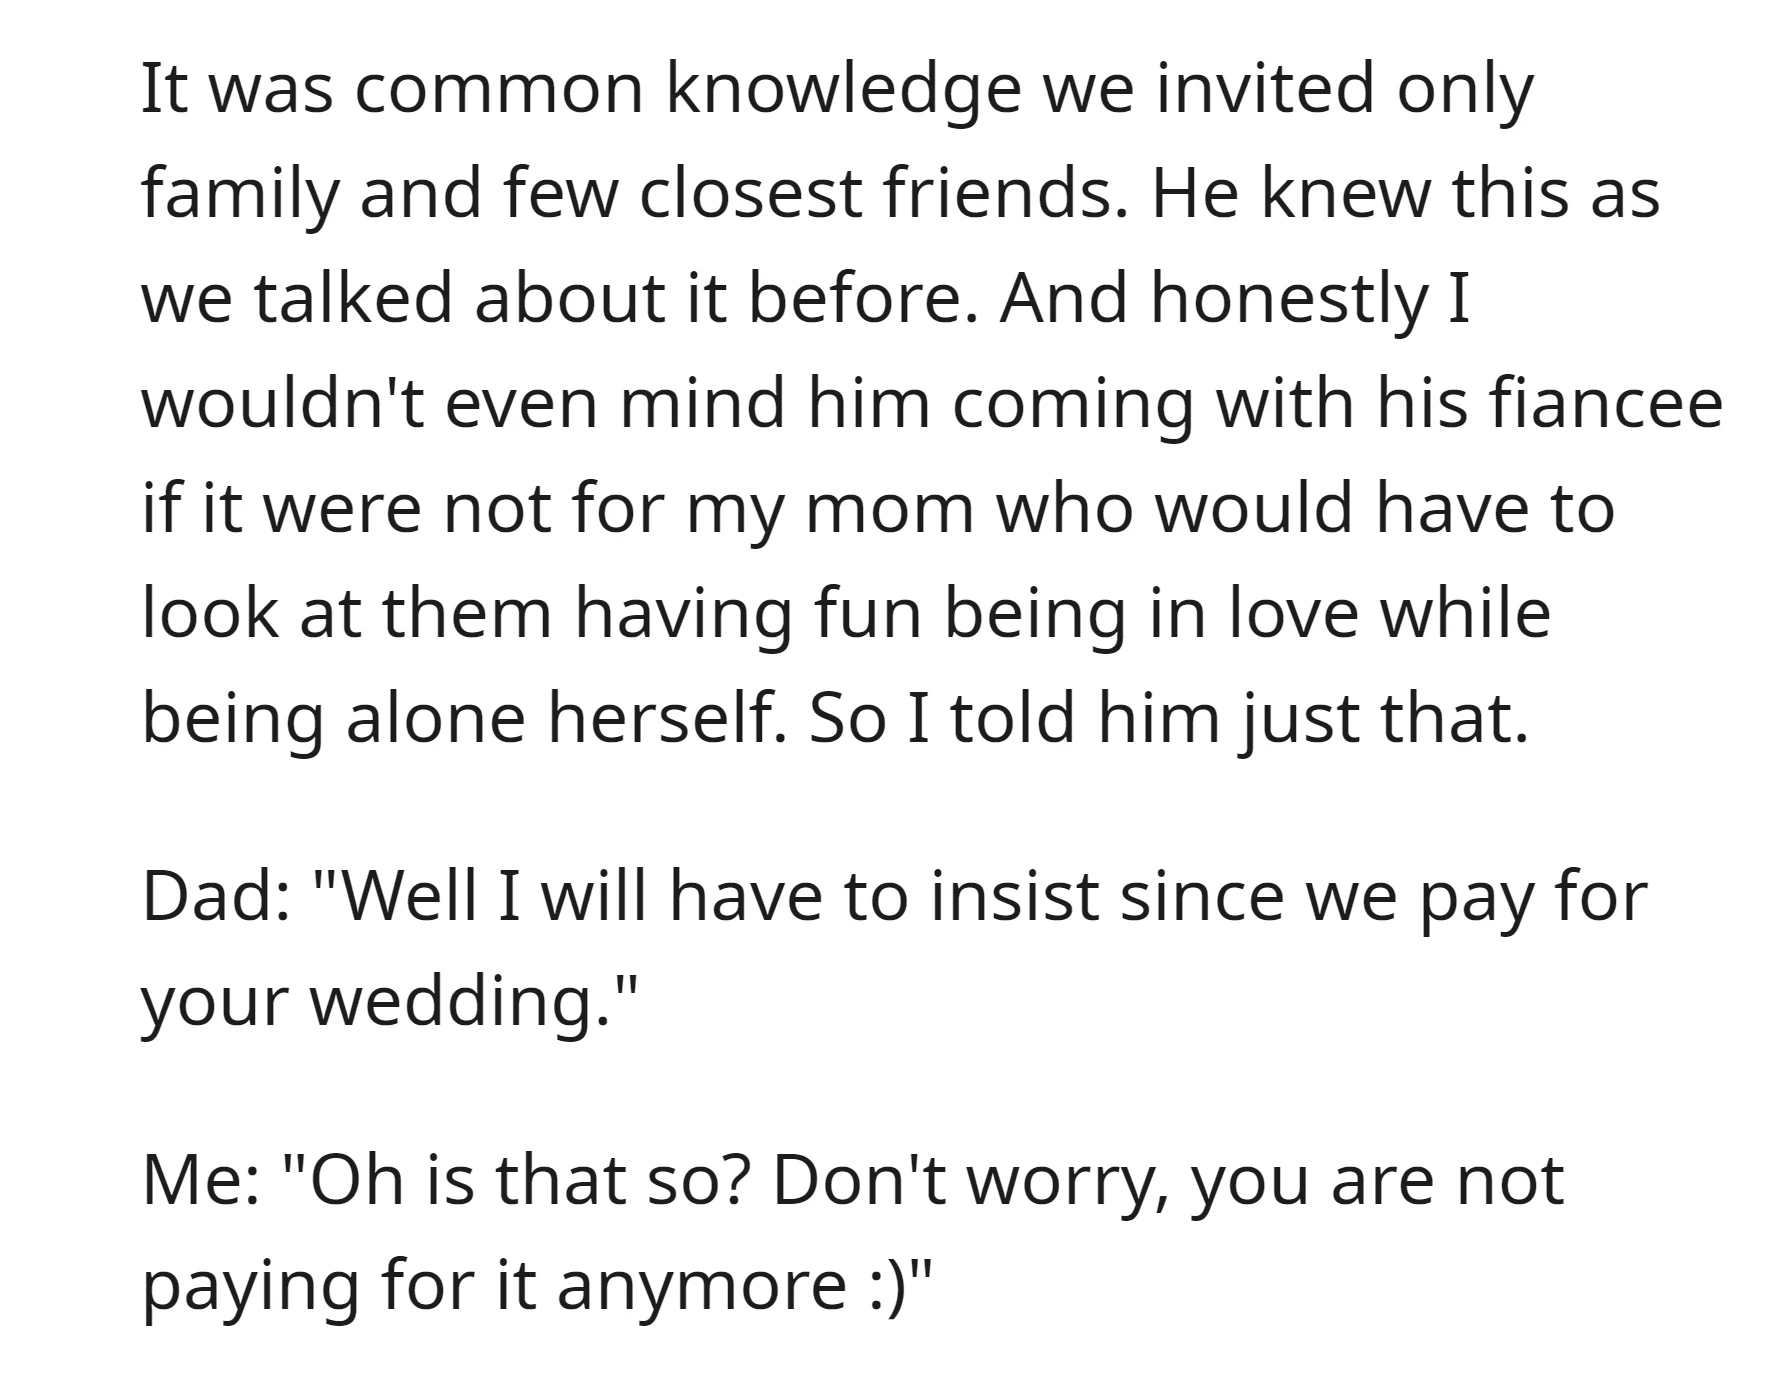 Due to the limited wedding guest list and the potential discomfort for OP's mom, she refused